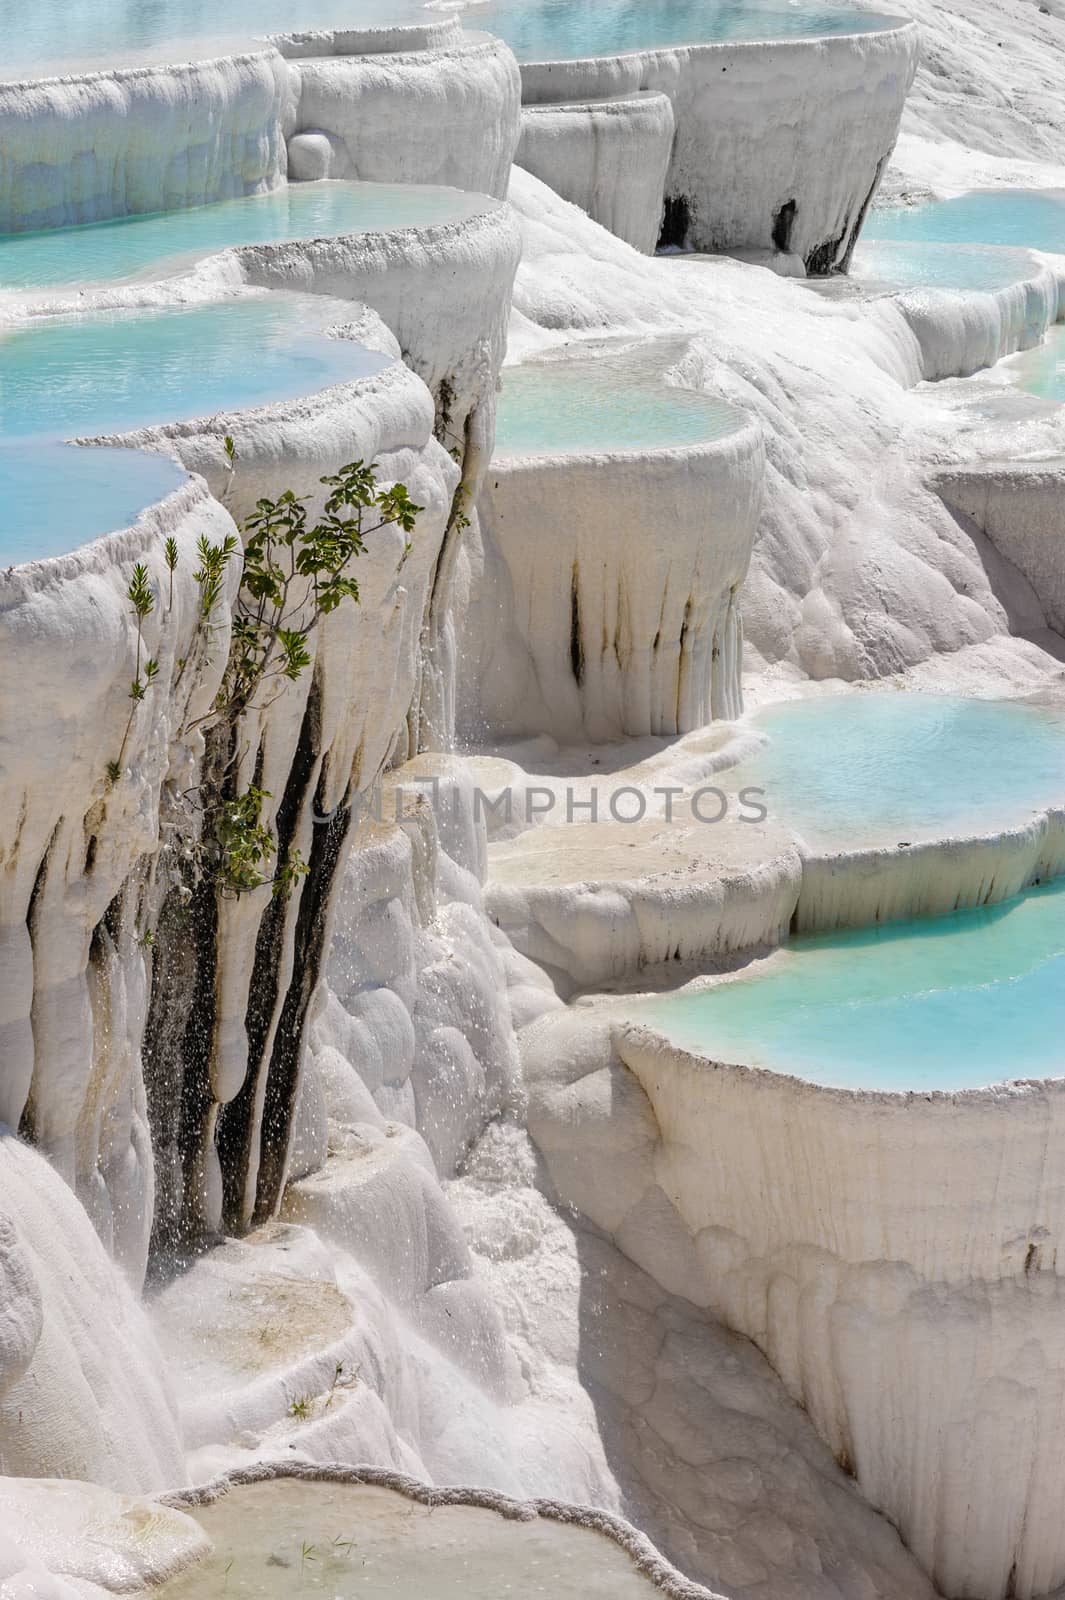 Travertine pools and terraces in Pamukkale, Turkey by starush